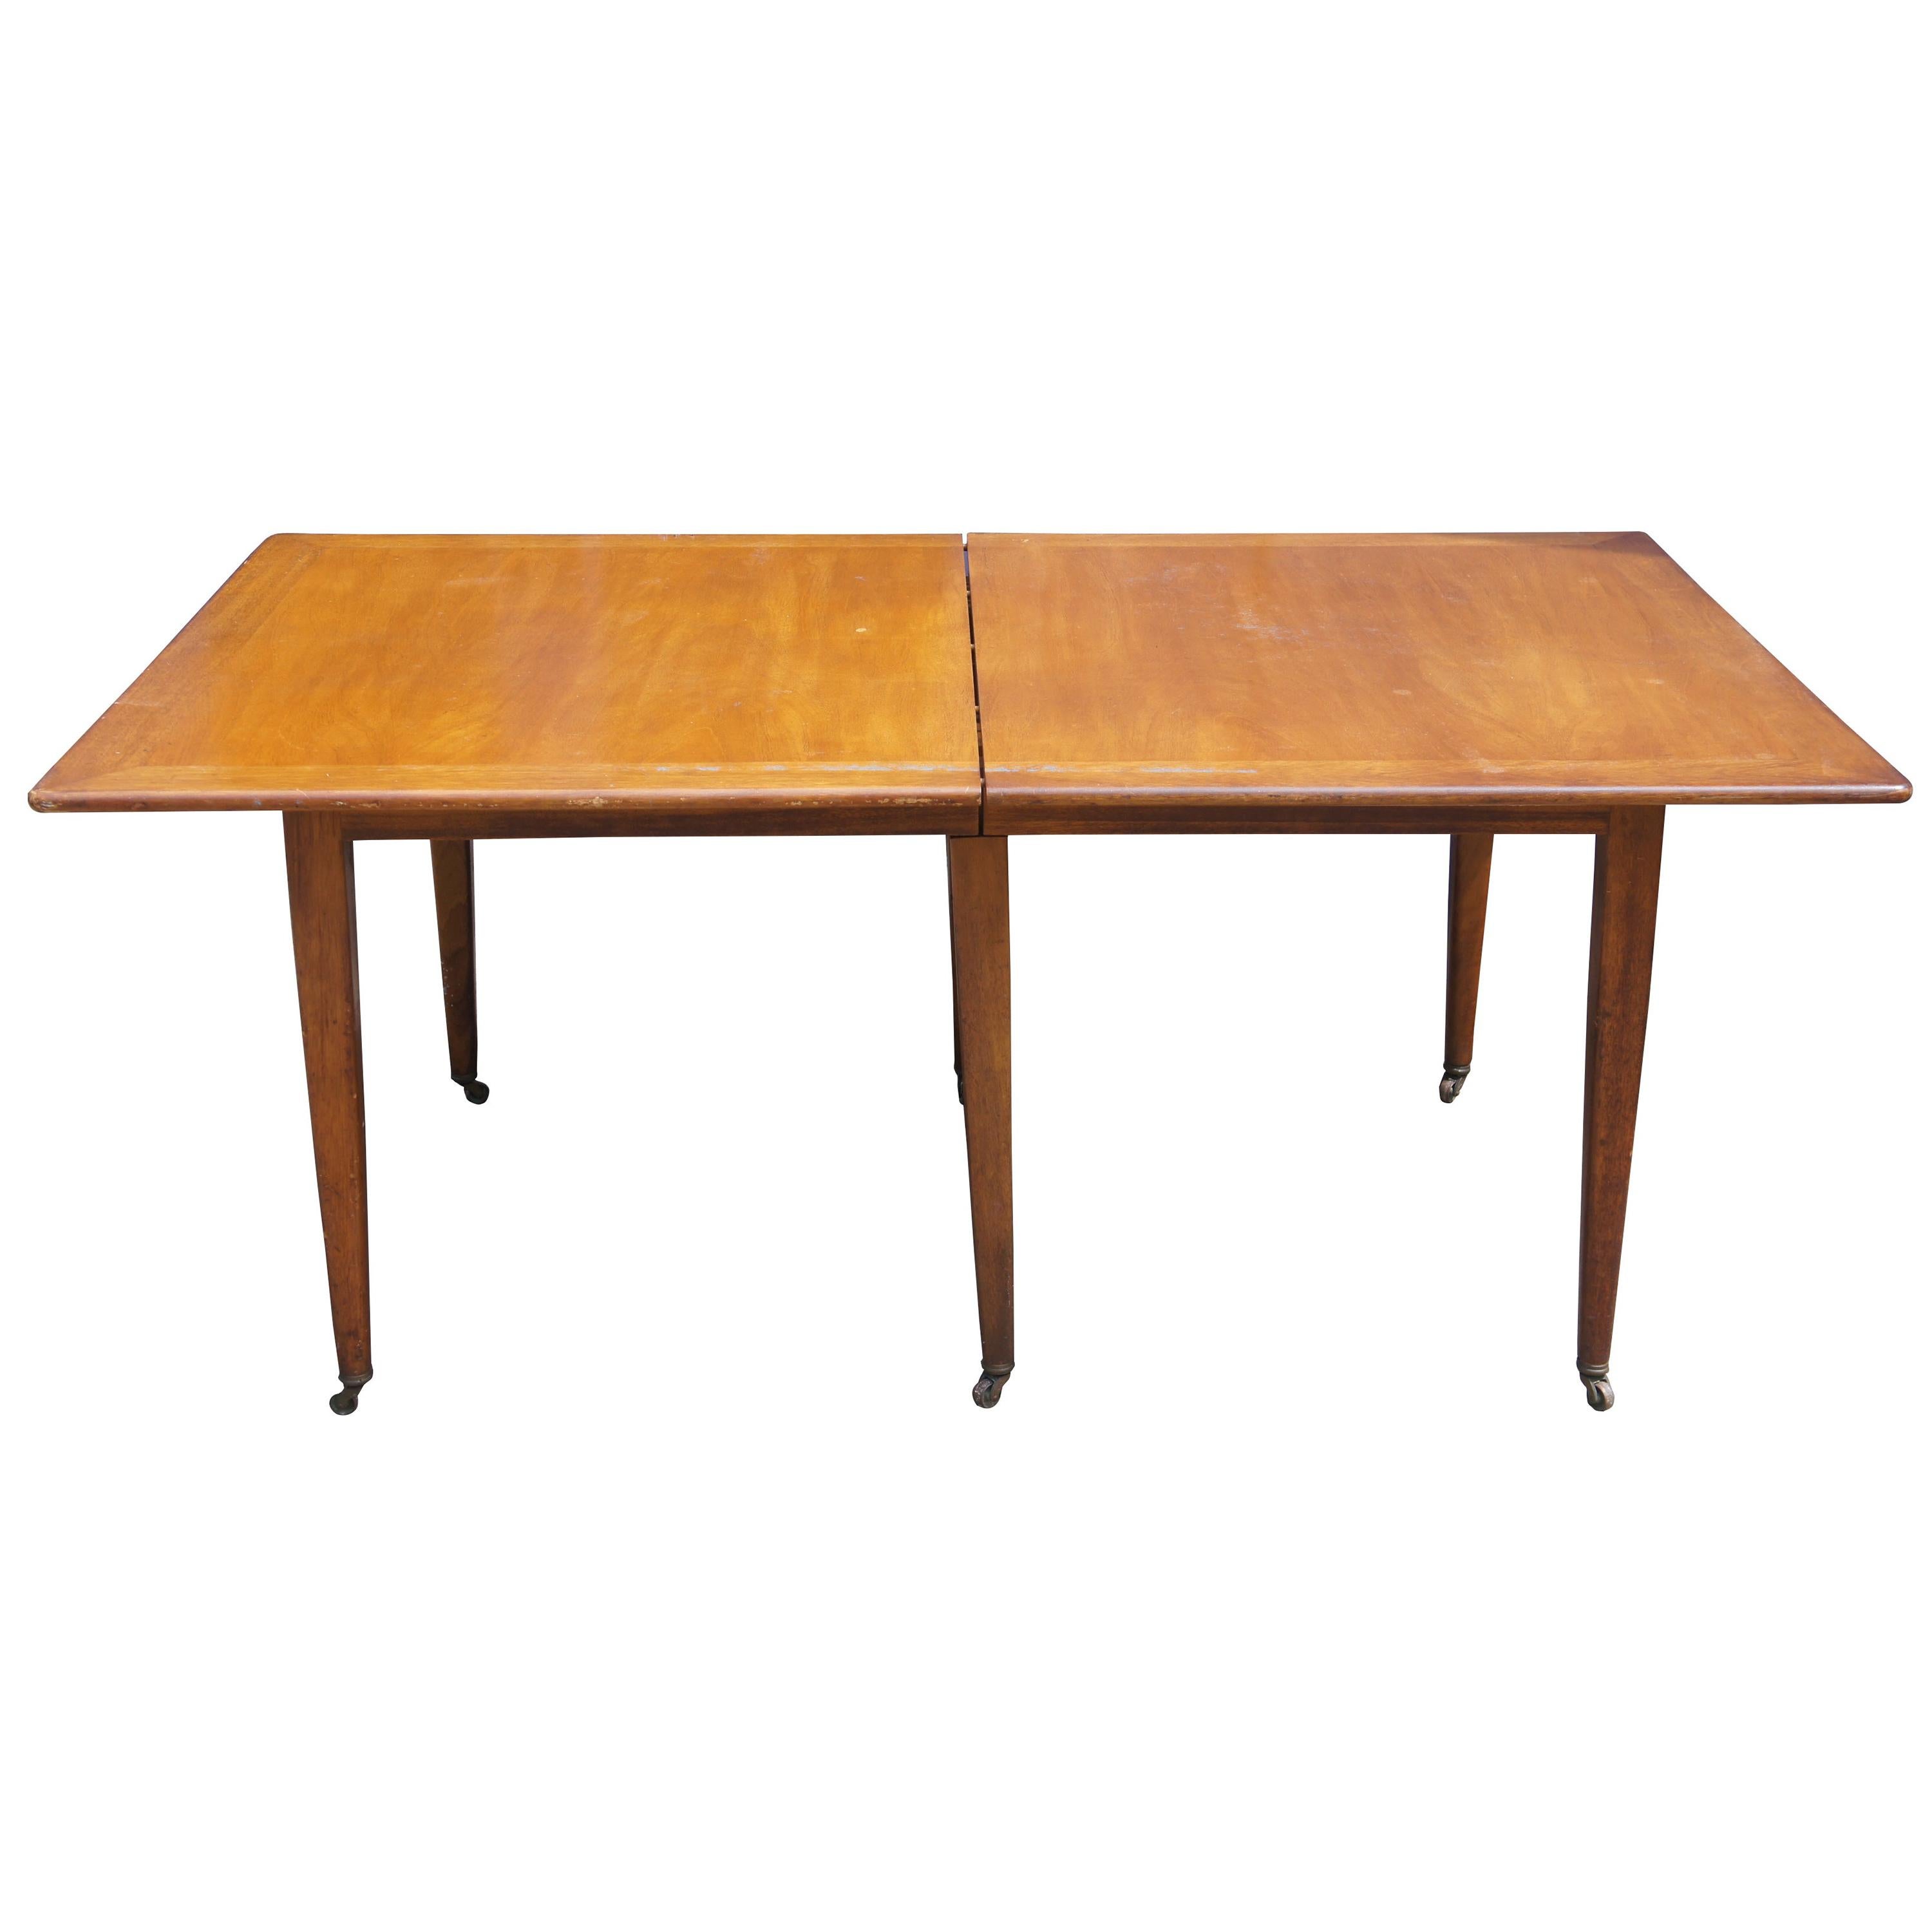 Mid-Century Modern Mahogany Dining Table by Edward Wormley for Dunbar Furniture For Sale